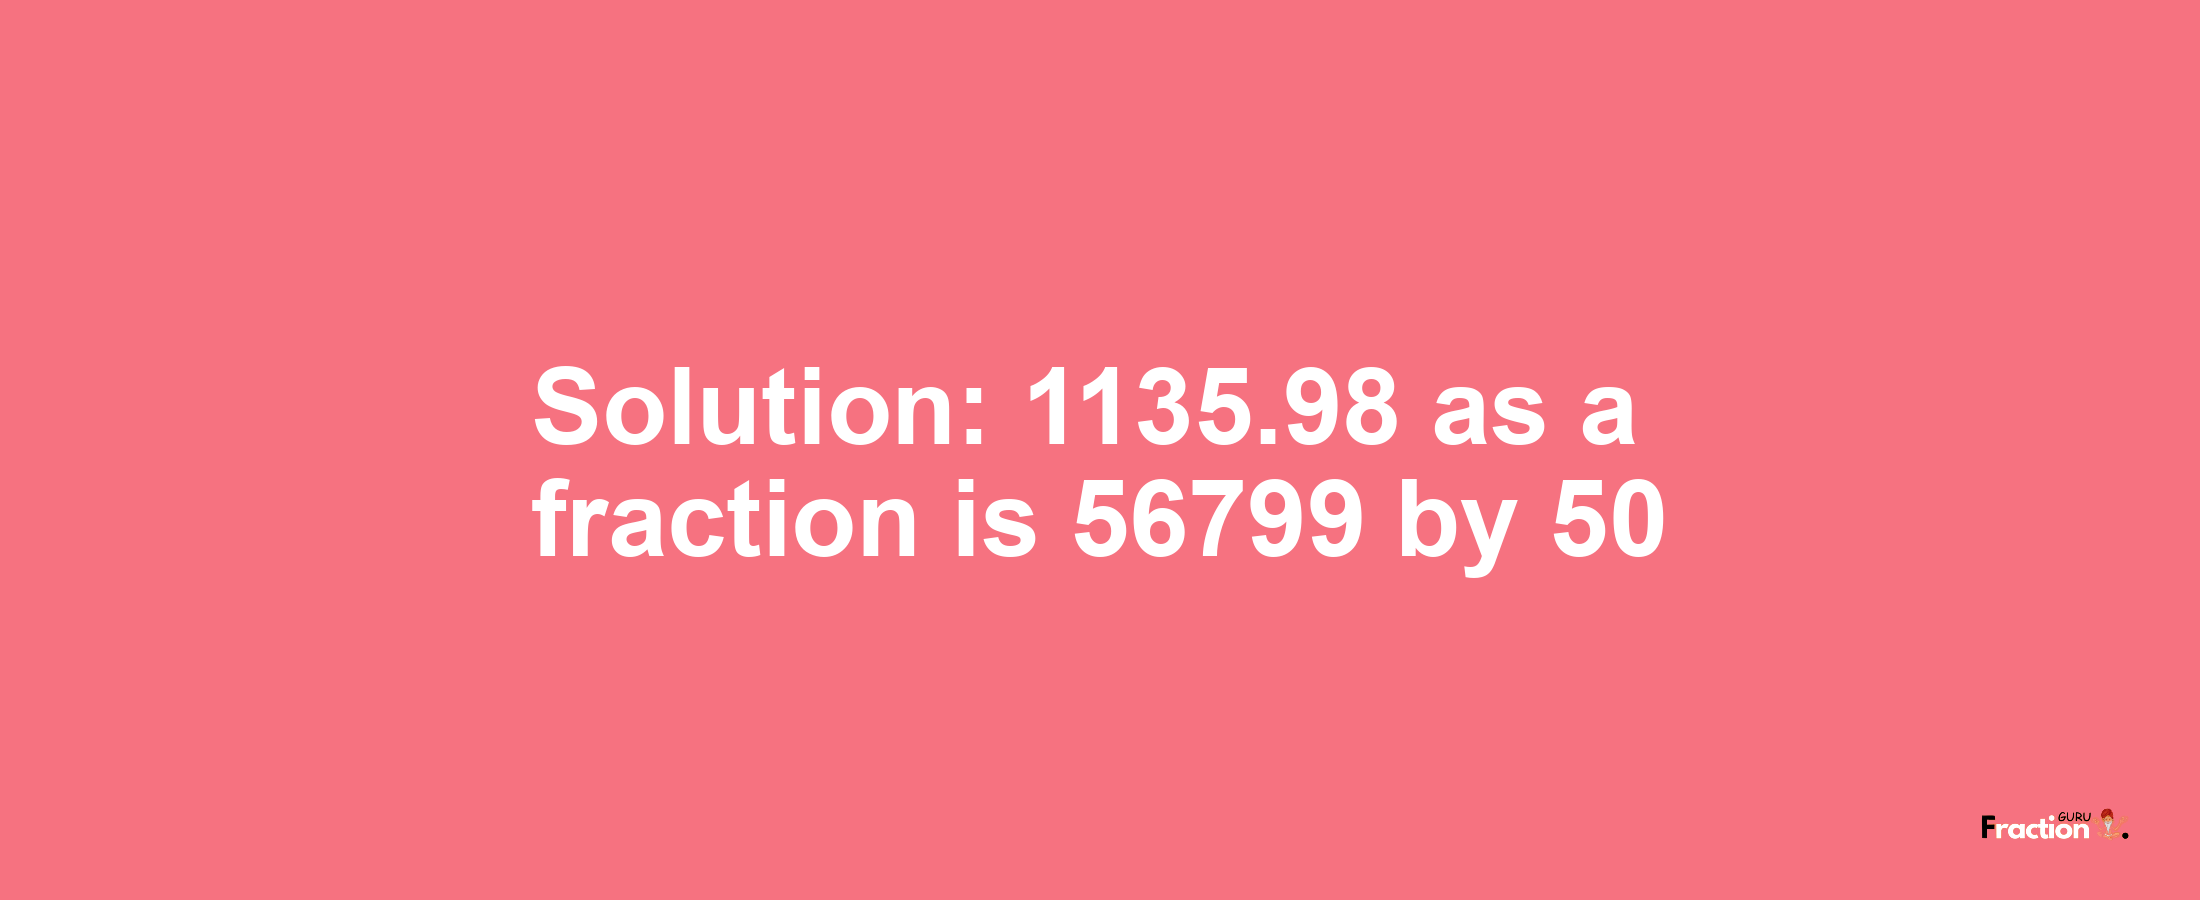 Solution:1135.98 as a fraction is 56799/50